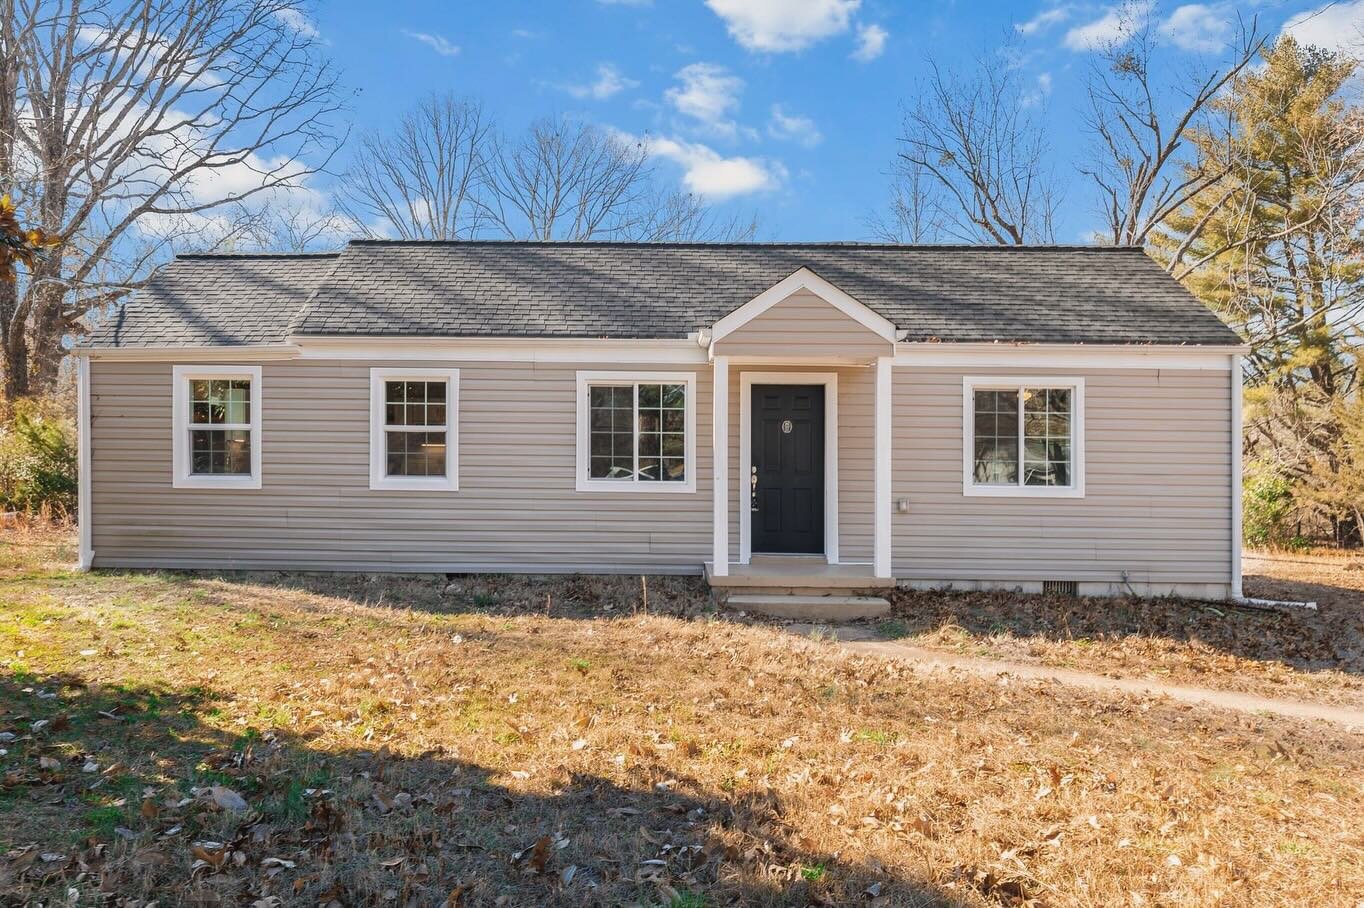 🏡 Recently Renovated Rancher Located in Sandston for sale! This single level home sits on a large corner lot and offers 3 bedrooms and 2 bathrooms. ✨

📍400 Young Drive. Sandston, VA 23150
MLS #: 2402990 | Agent: Andrea Johnson - Real Estate Agent 
